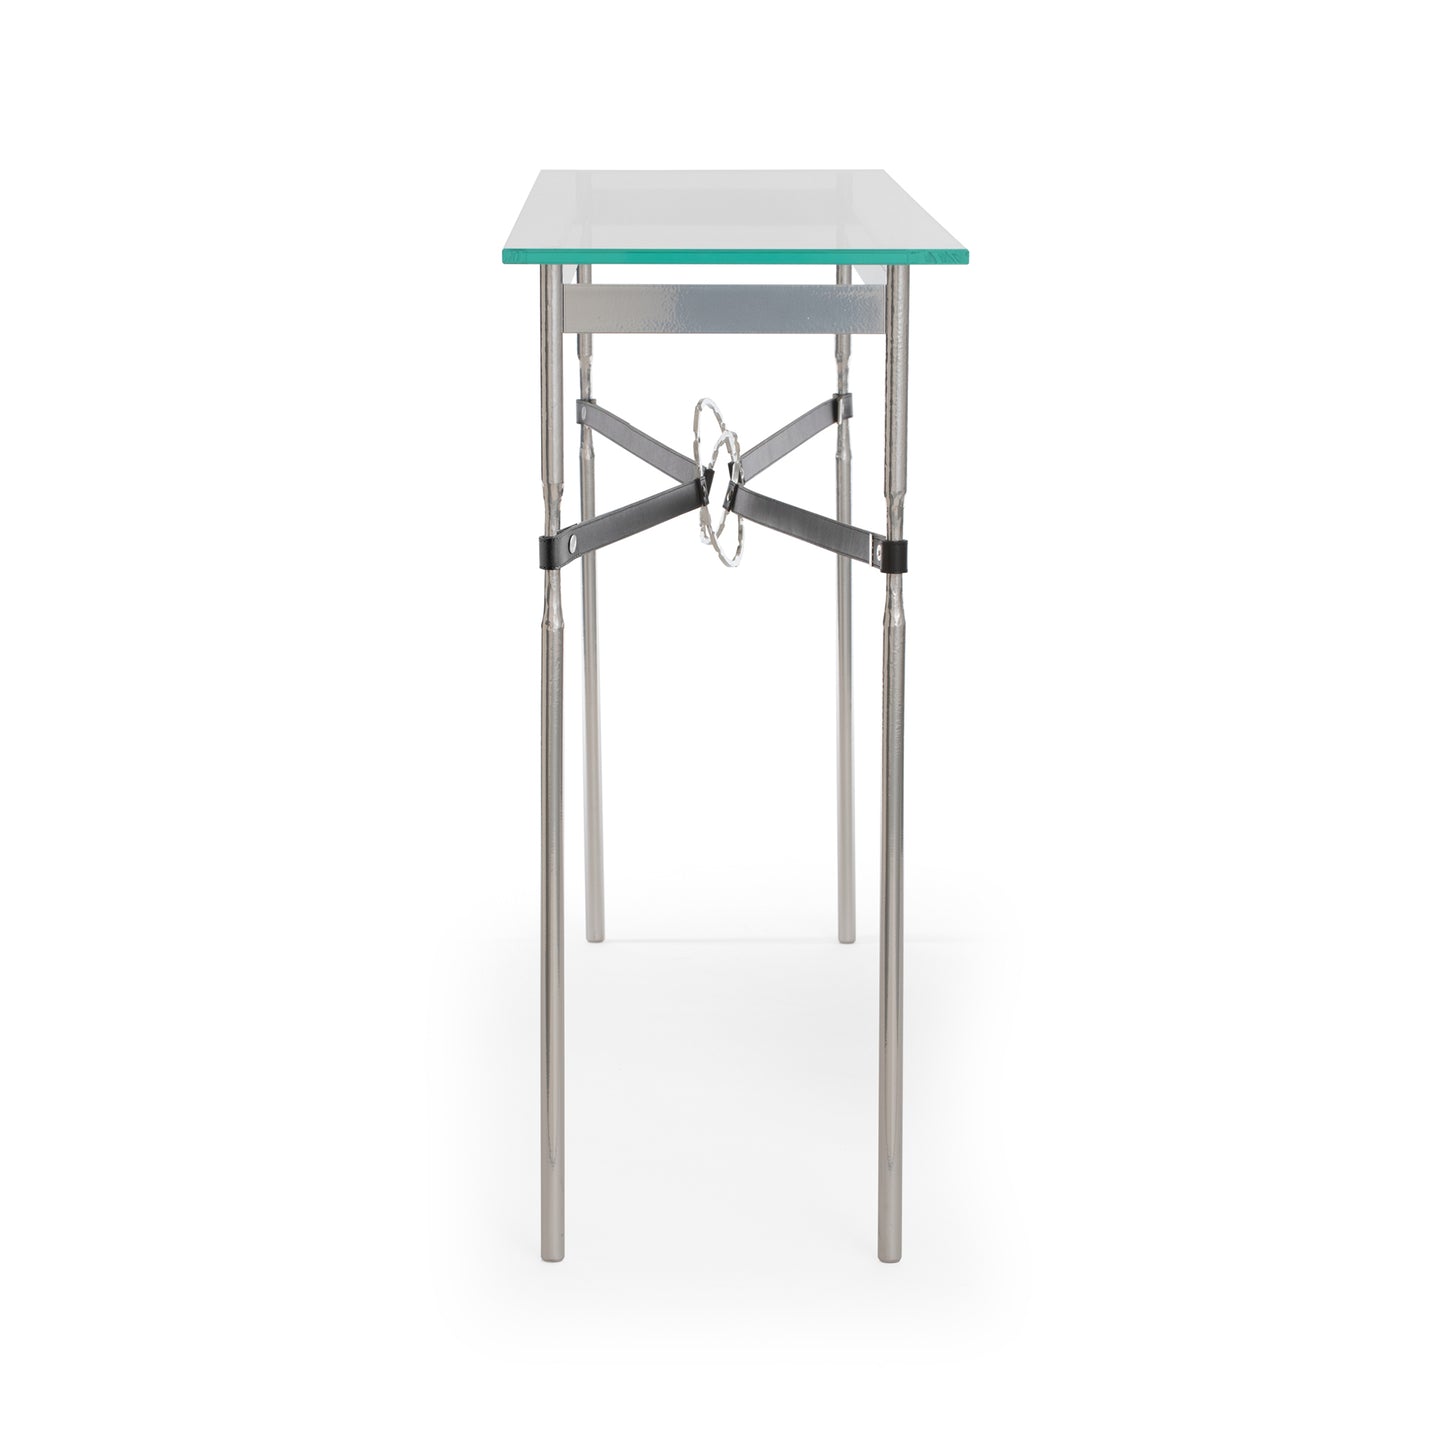 An Equus Console Table by Hubbardton Forge with metal legs and a tempered glass top.